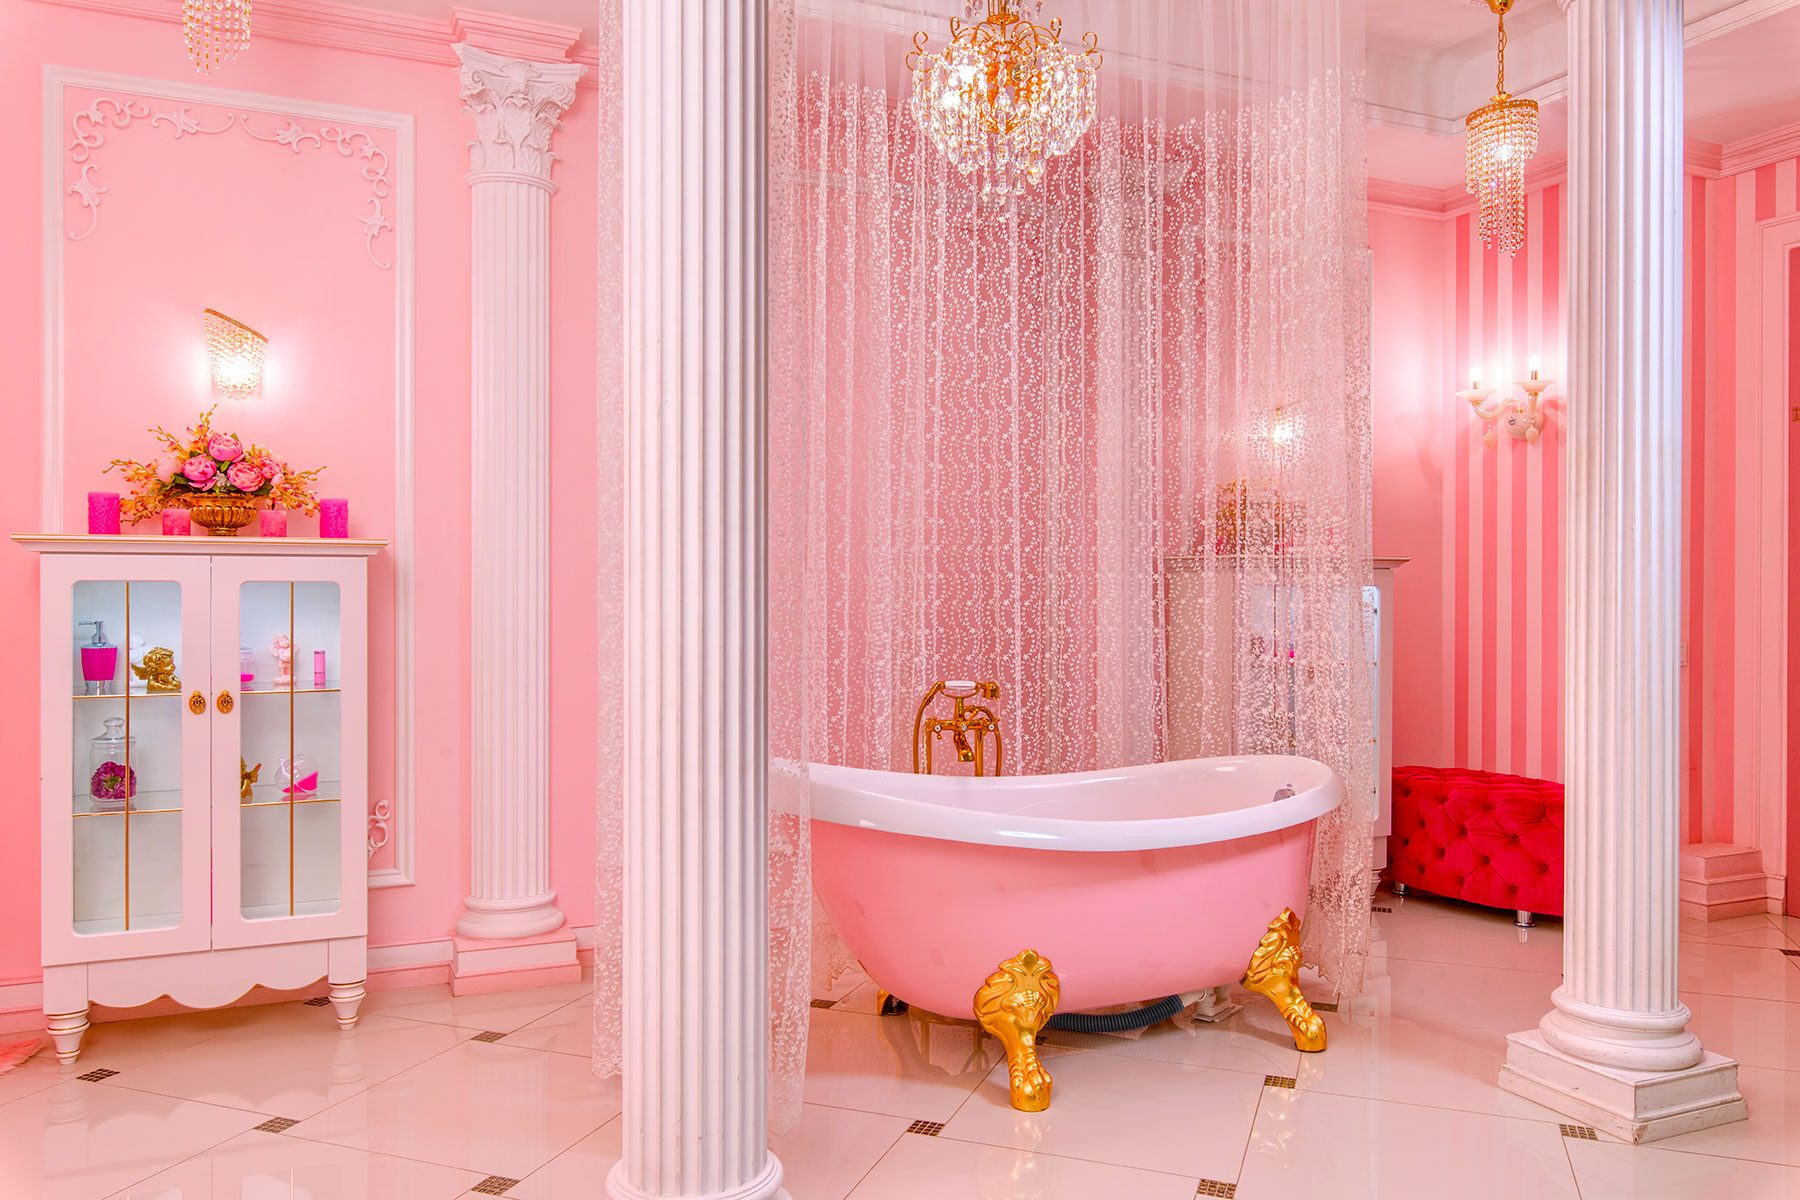 Barbiecore Is the Hot Pink Home Trend That Will Be Everywhere in 2023